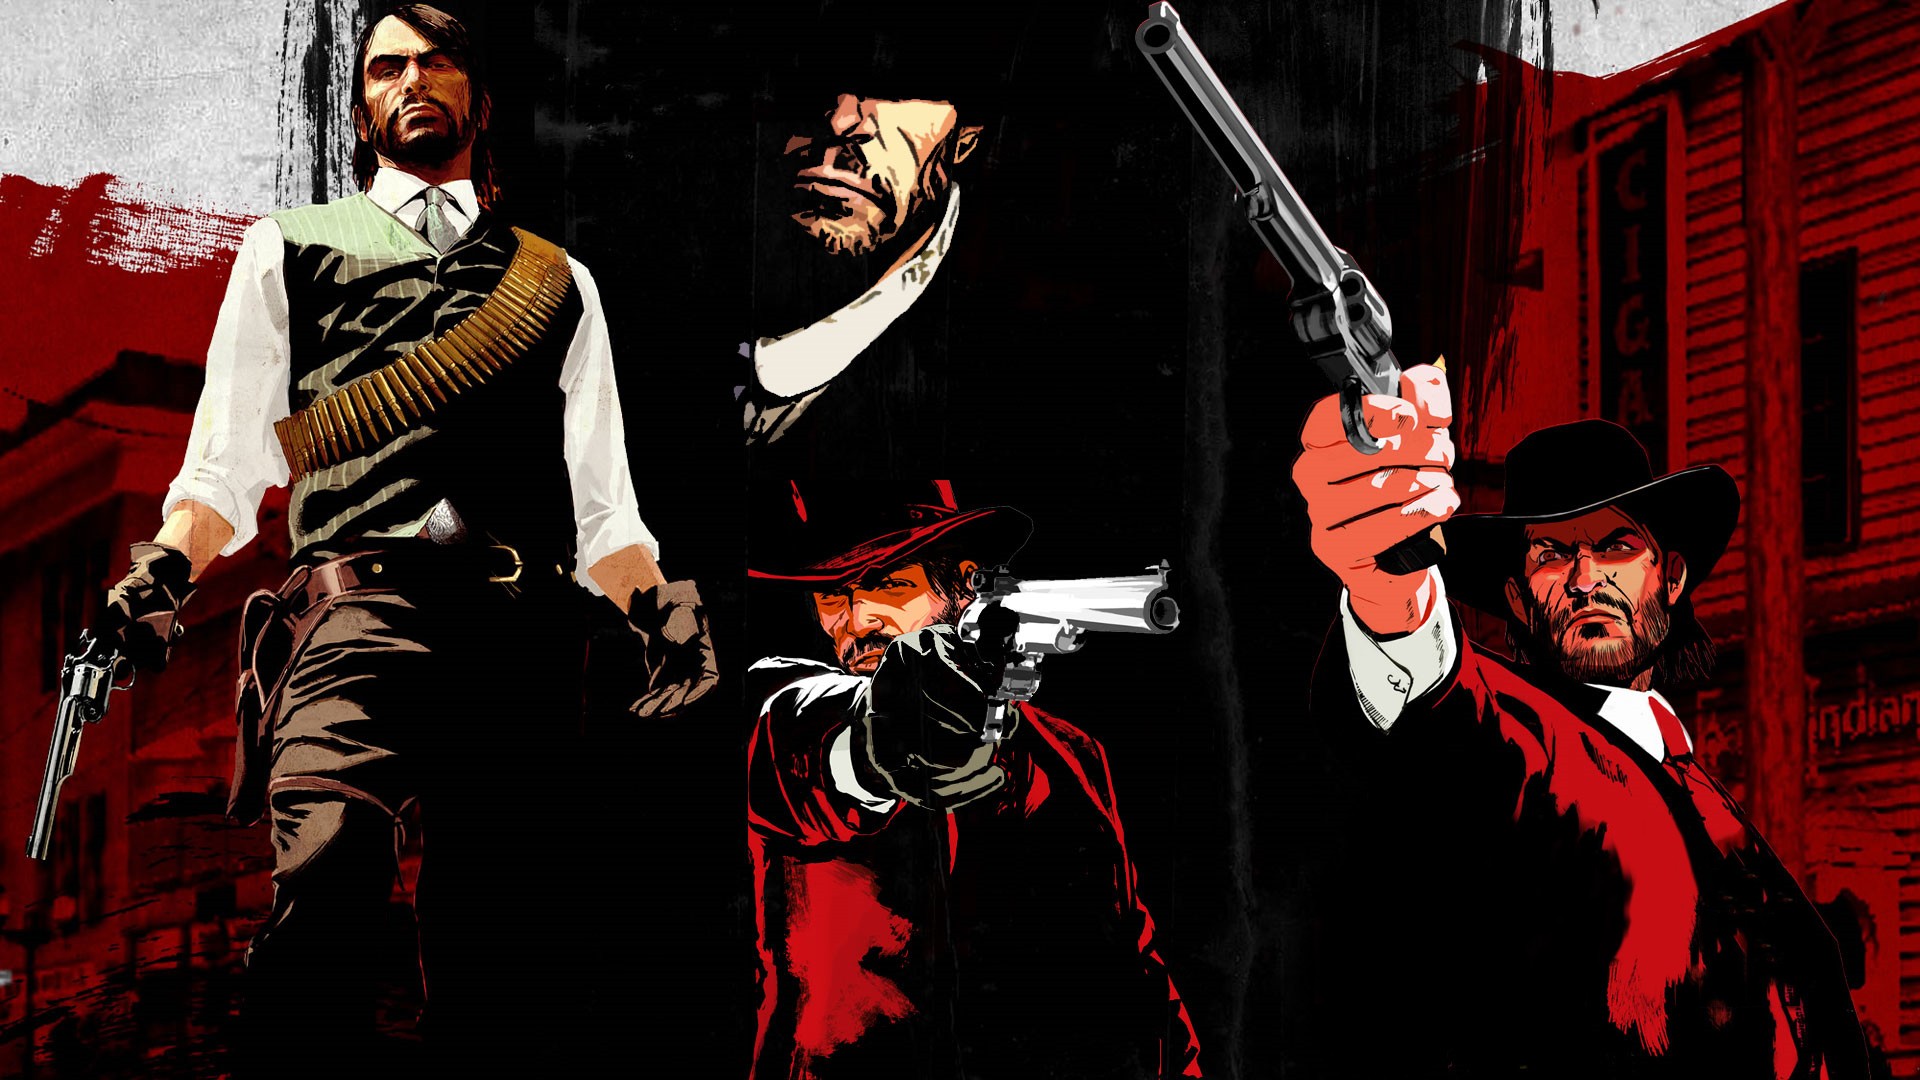 General 1920x1080 Red Dead Redemption John Marston Rockstar Games artwork video games video game characters